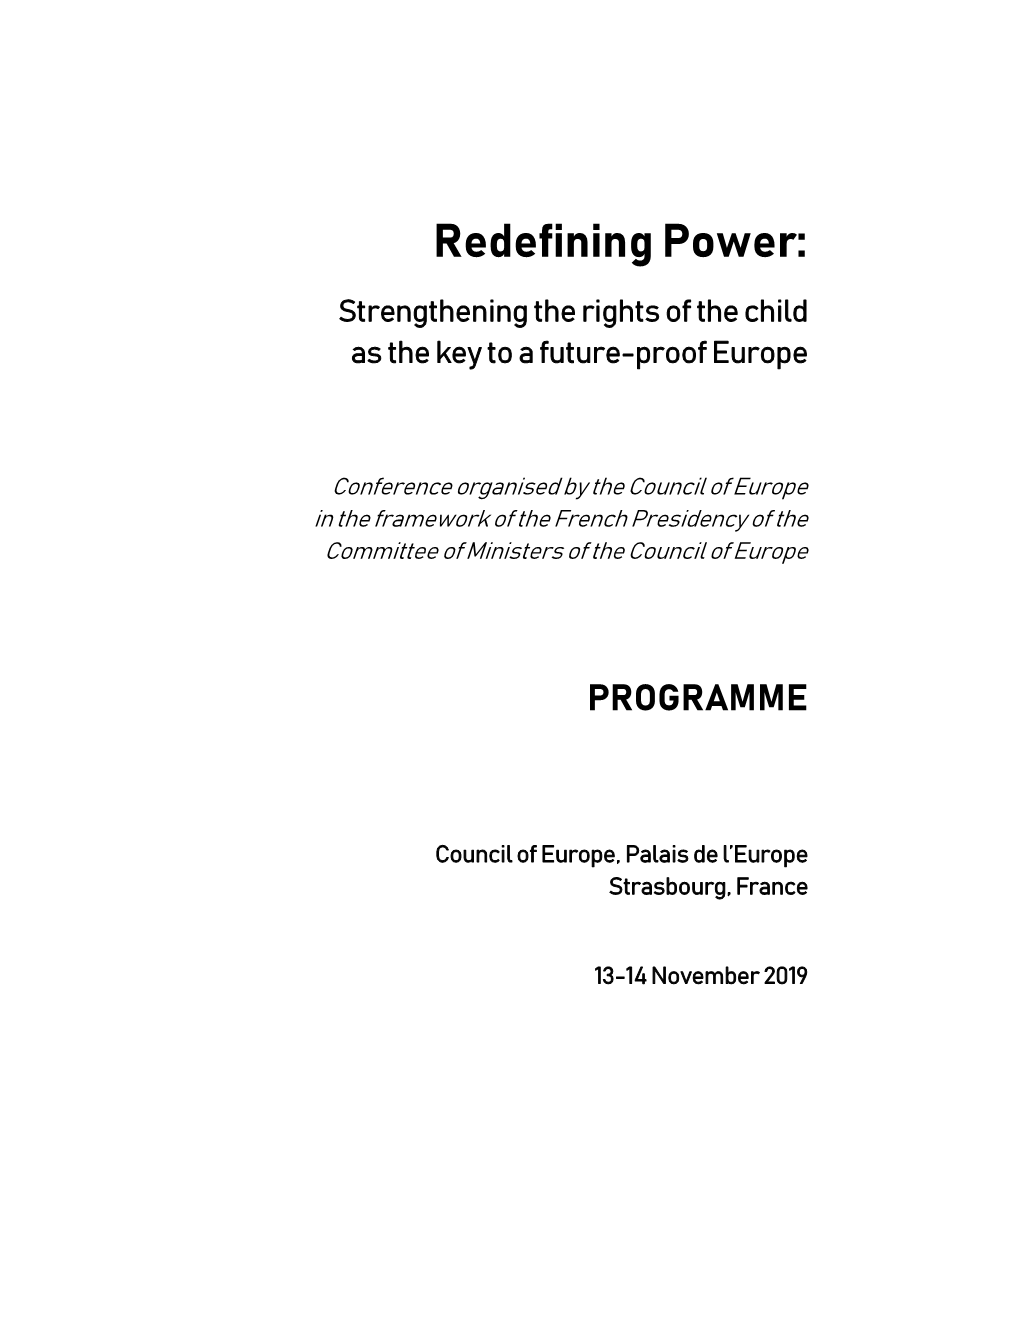 Conference “Redefining Power: Strengthening the Rights Of